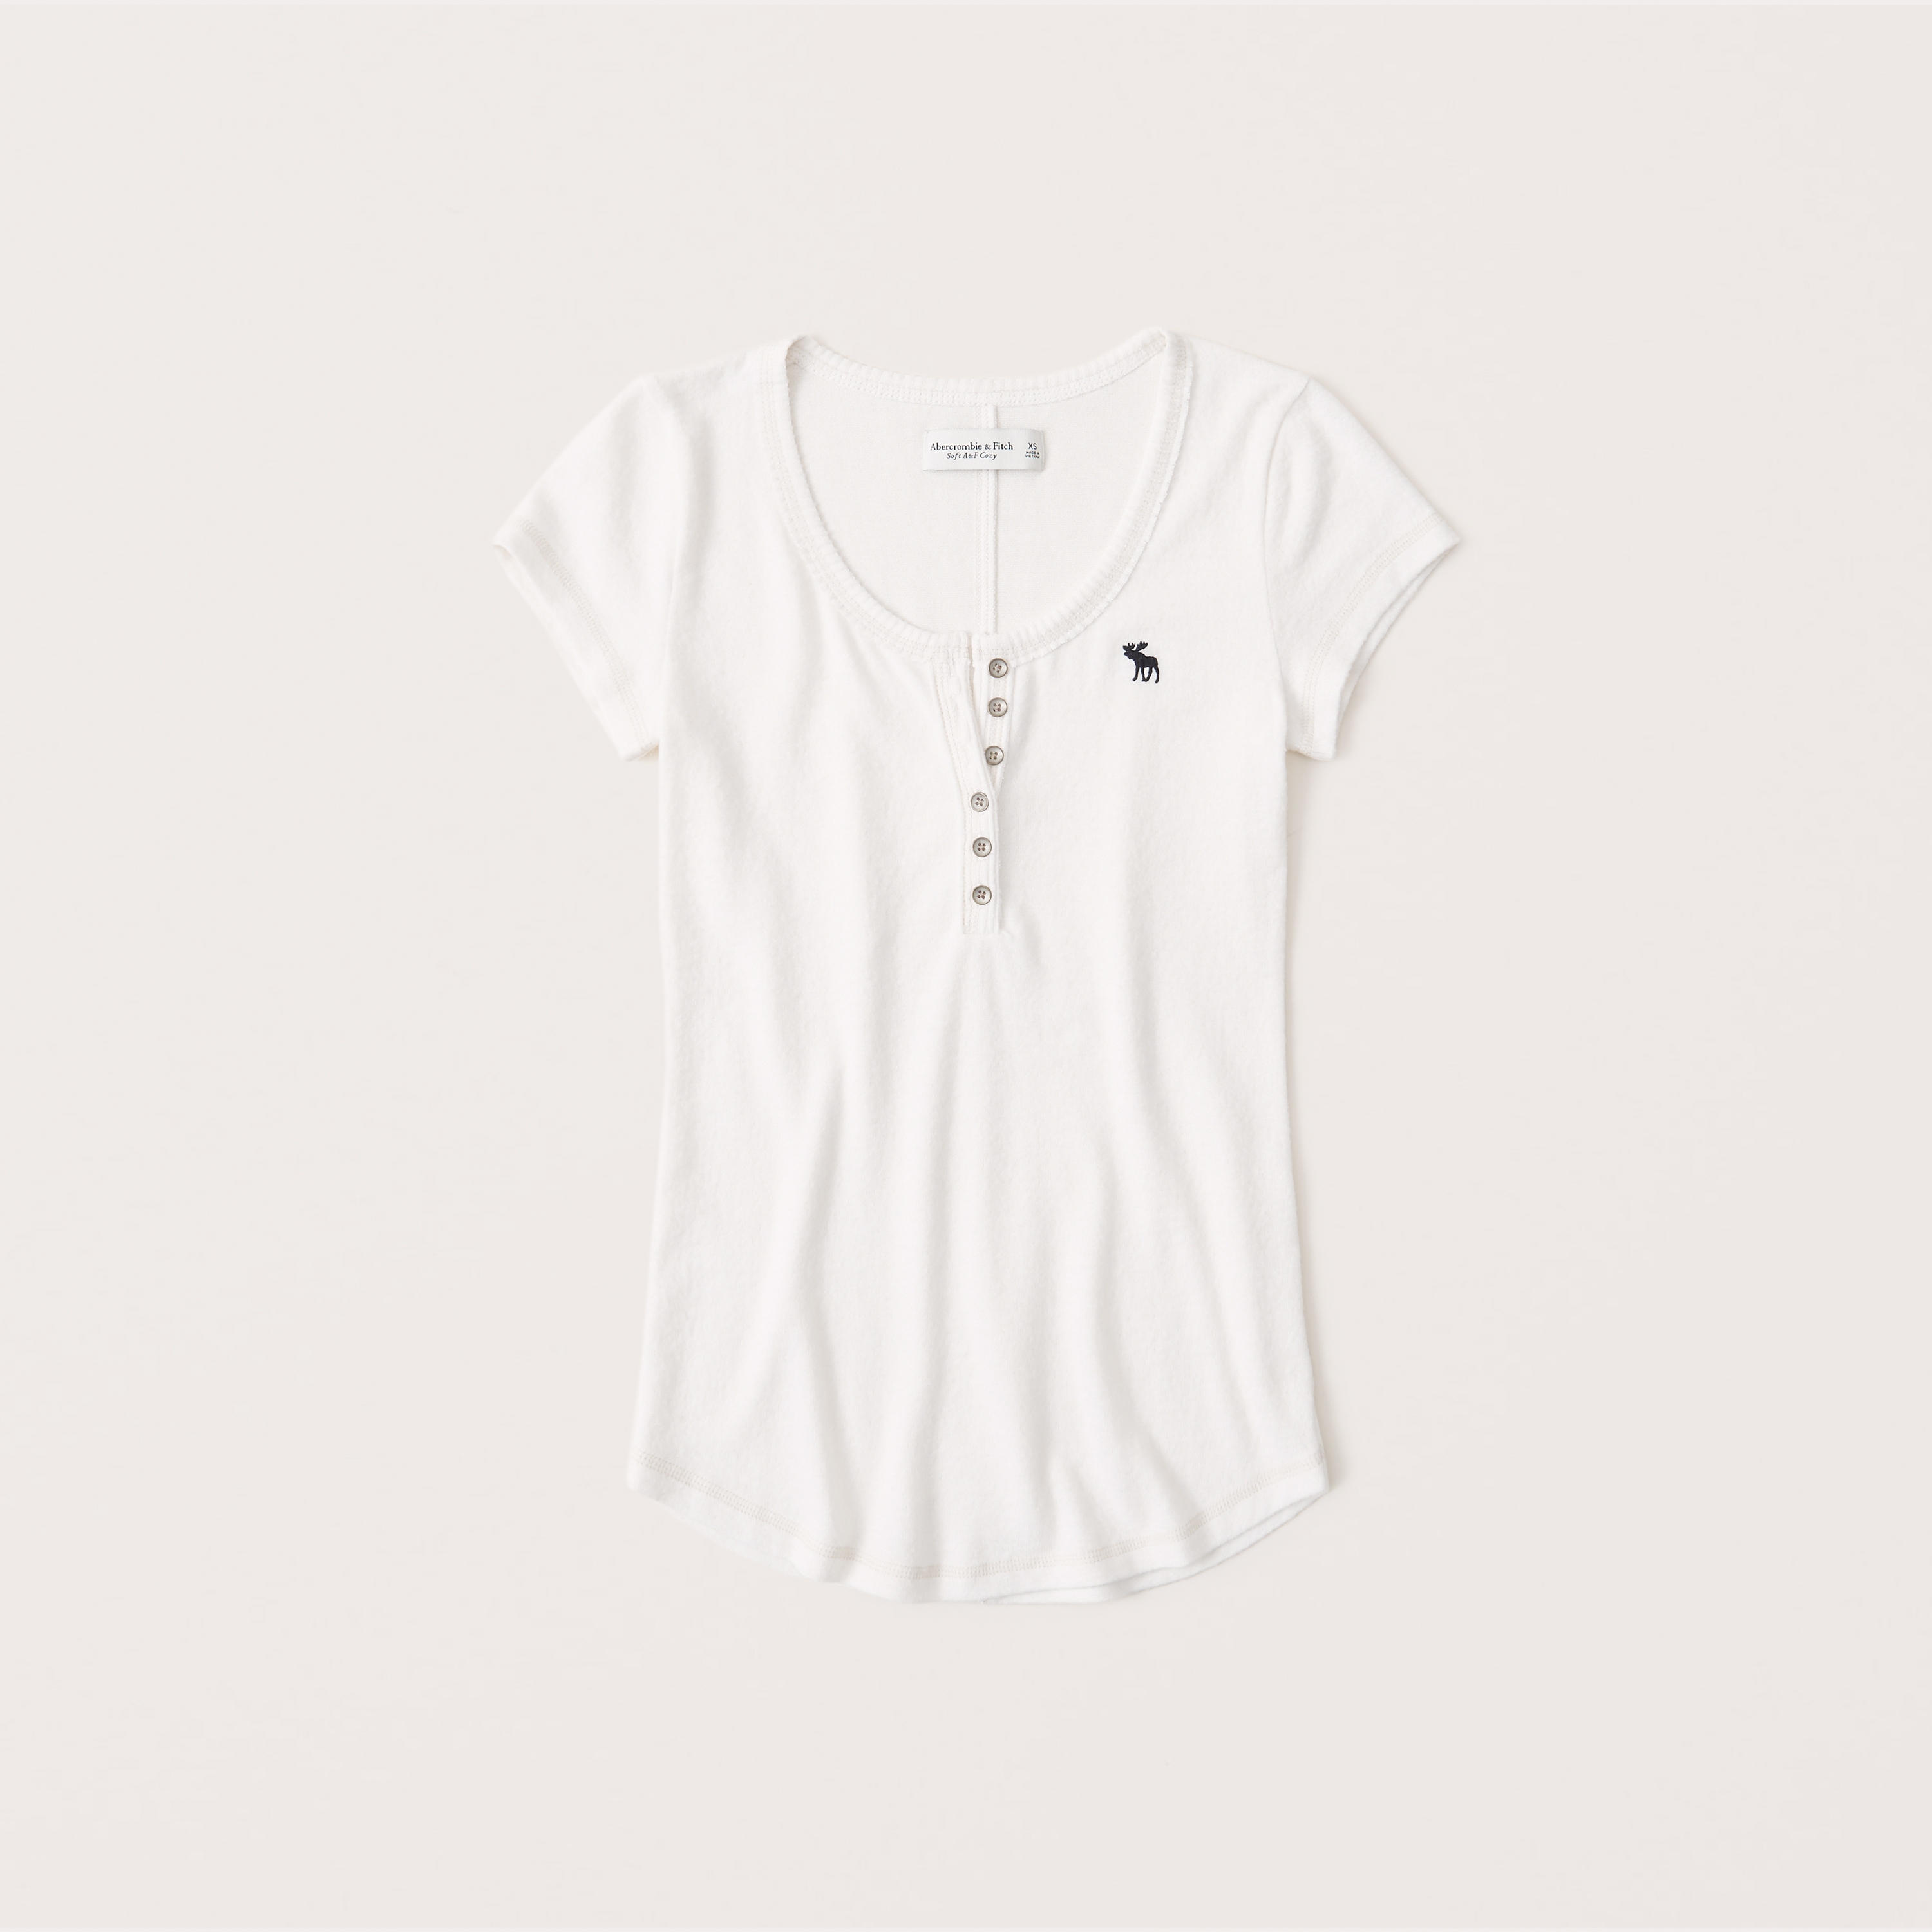 abercrombie & fitch henley womens